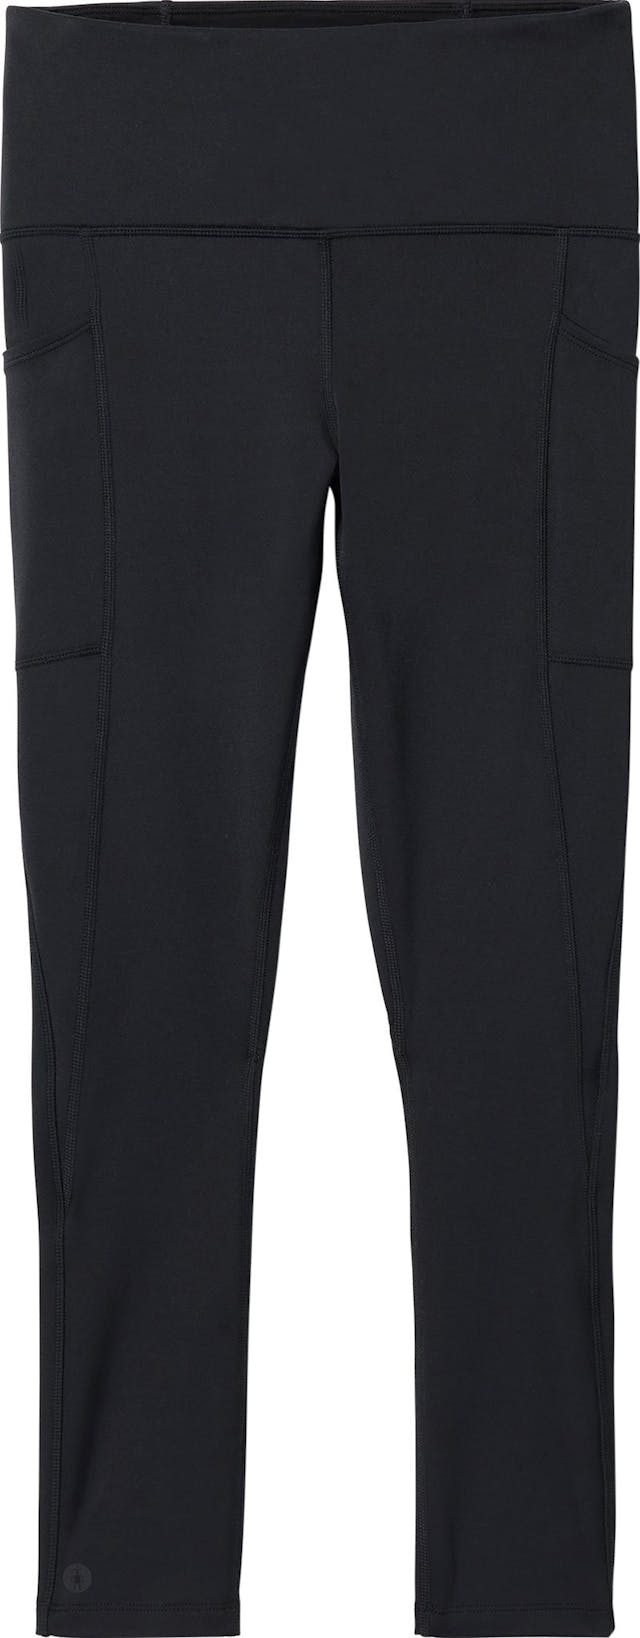 Product image for Active 7/8 Legging - Women's